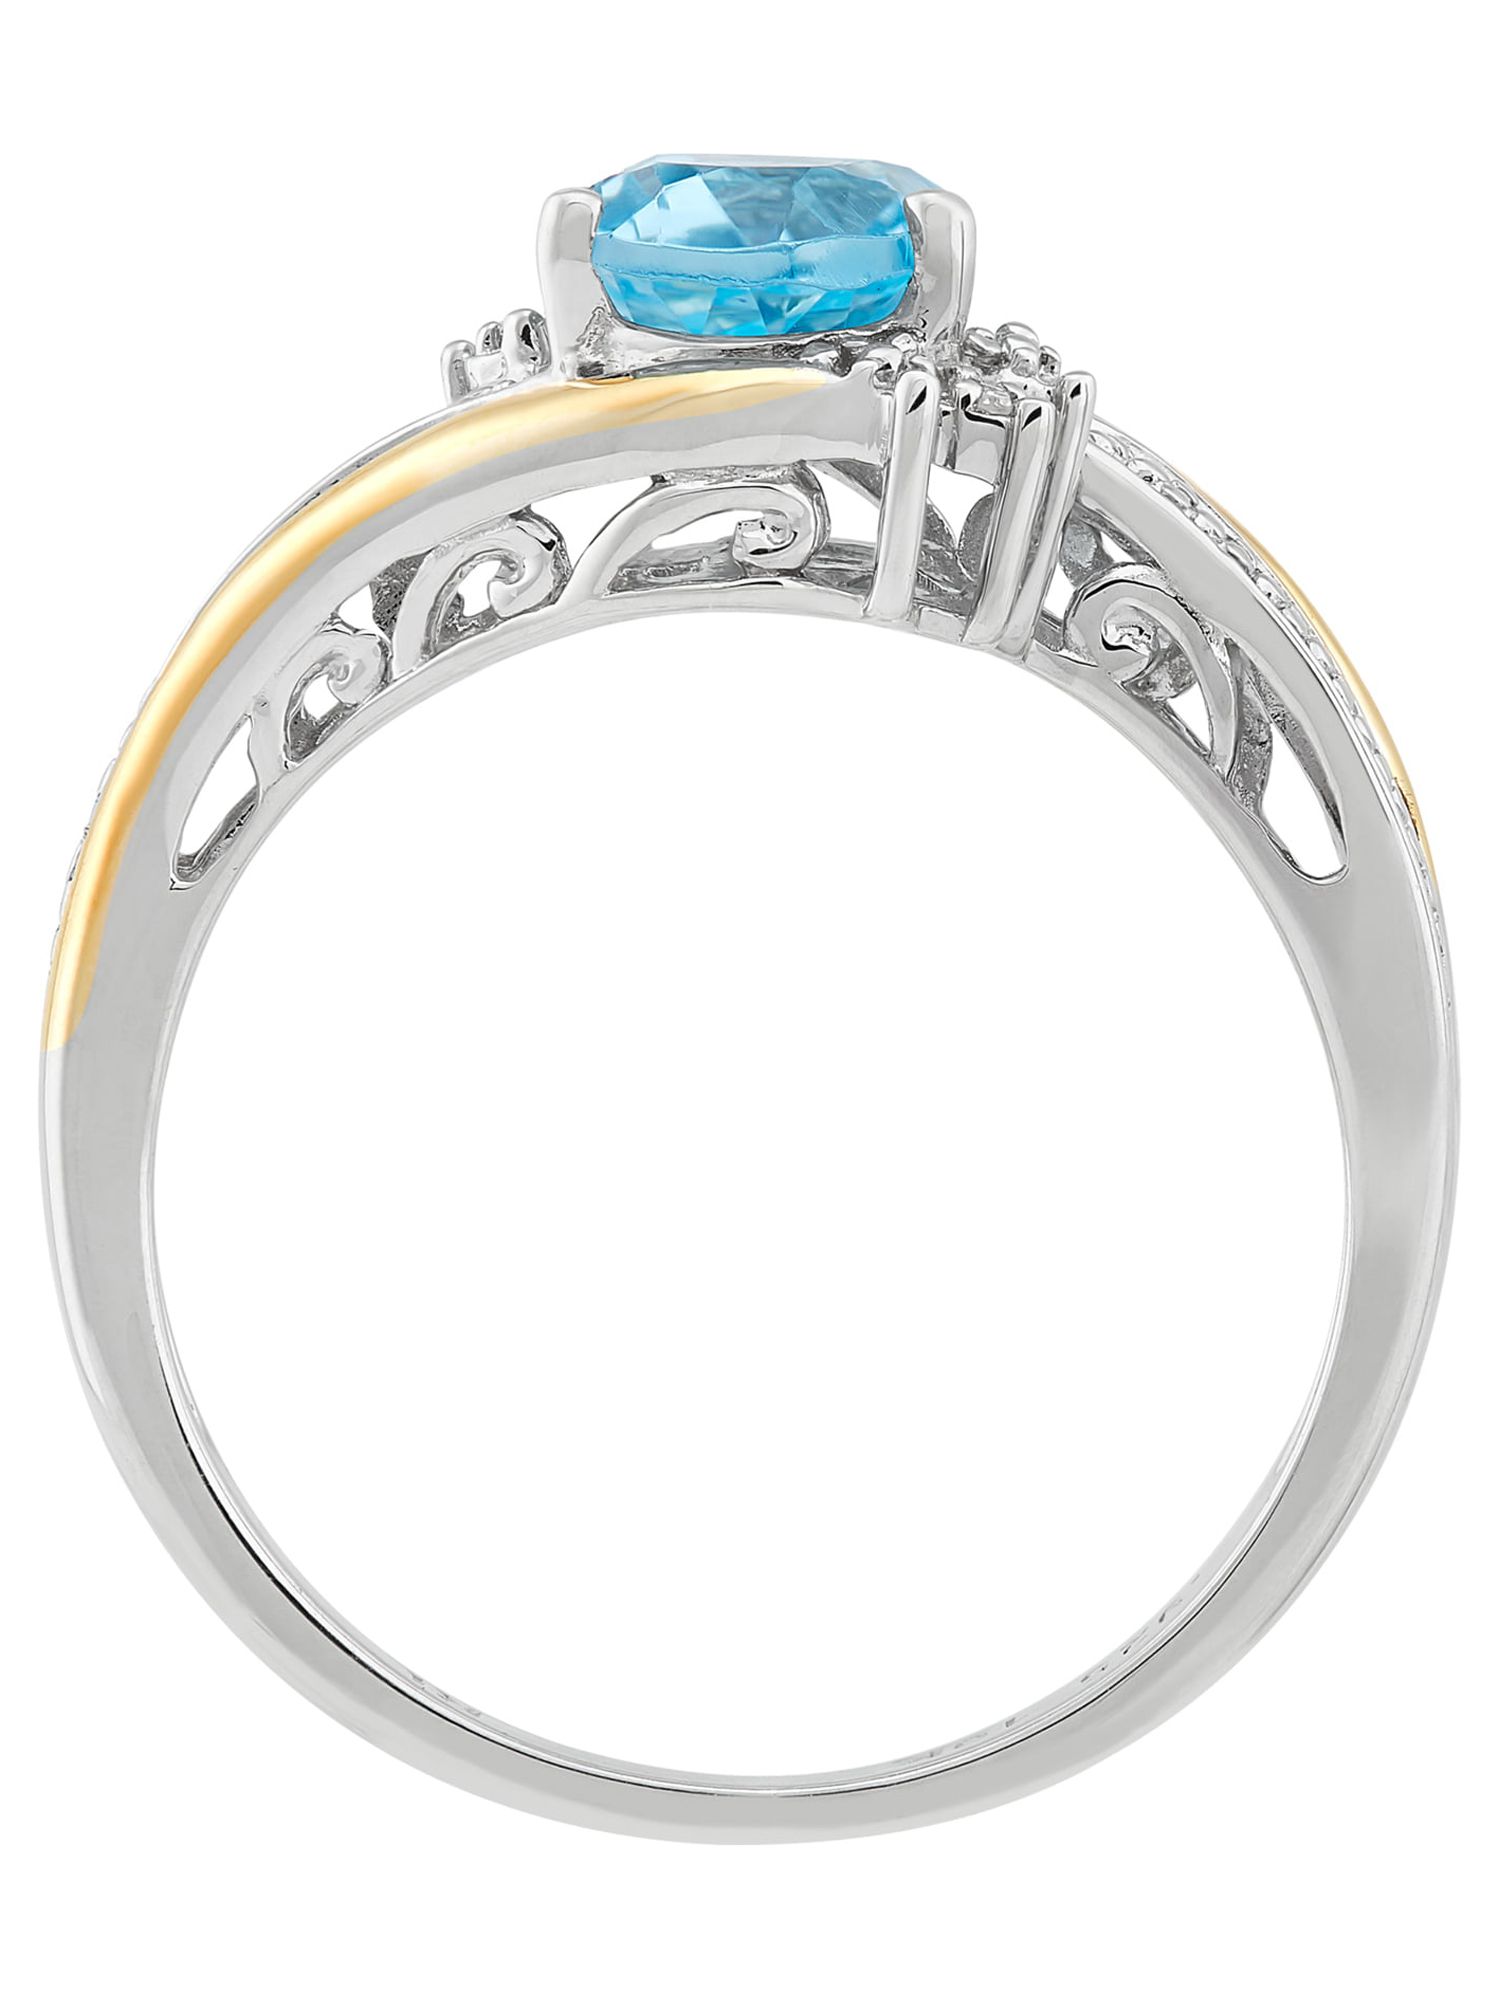 Brilliance Fine Jewelry Genuine Blue Topaz Diamond Accent Ring in Sterling Silver and 10K Yellow Gold - image 4 of 4